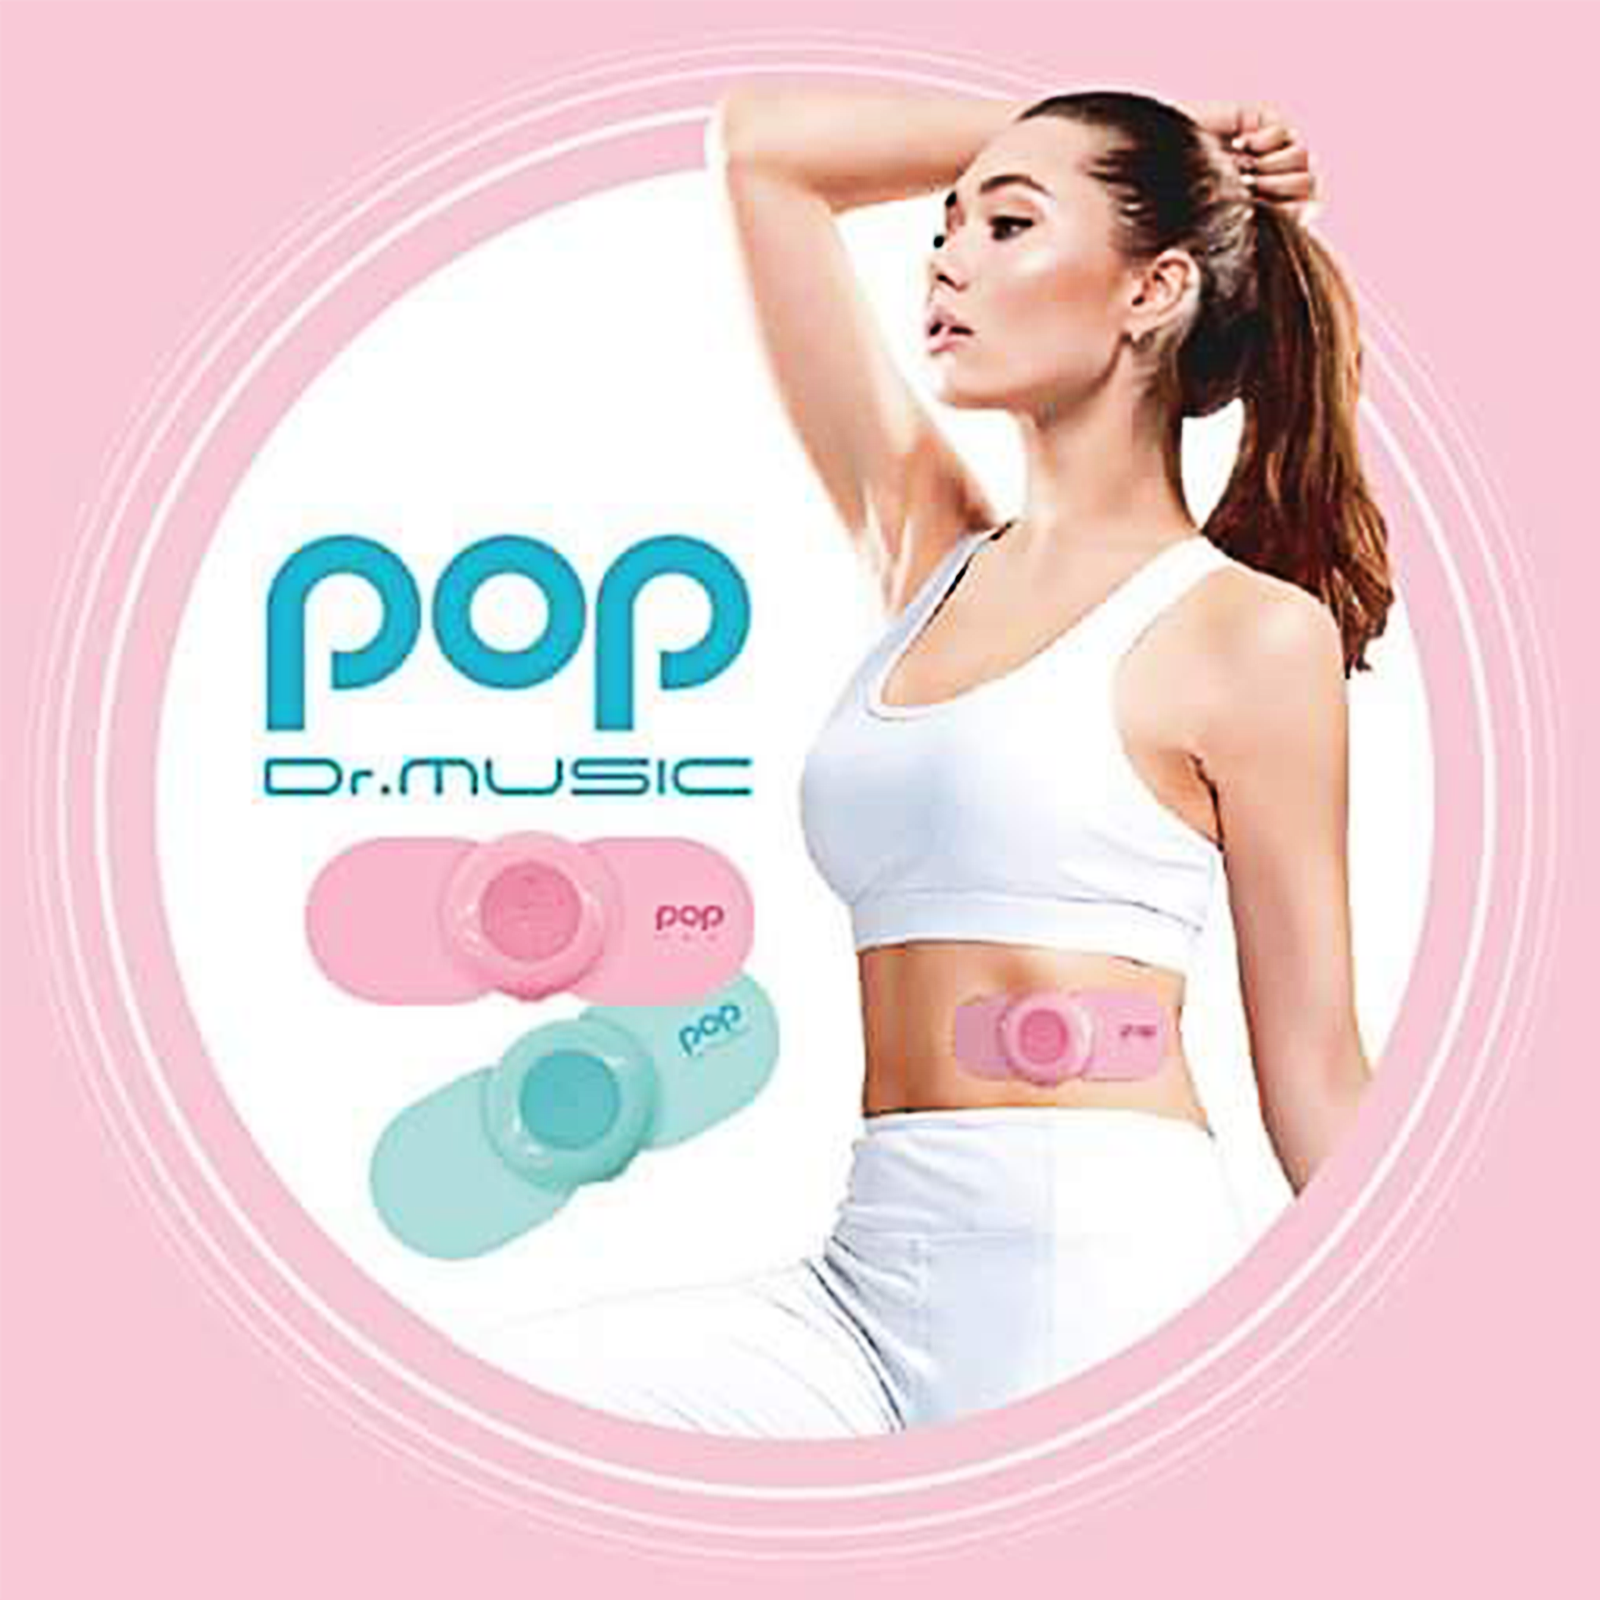 POP Dr.MUSIC (Low-frequency therapy massager) – Health Korea Shop